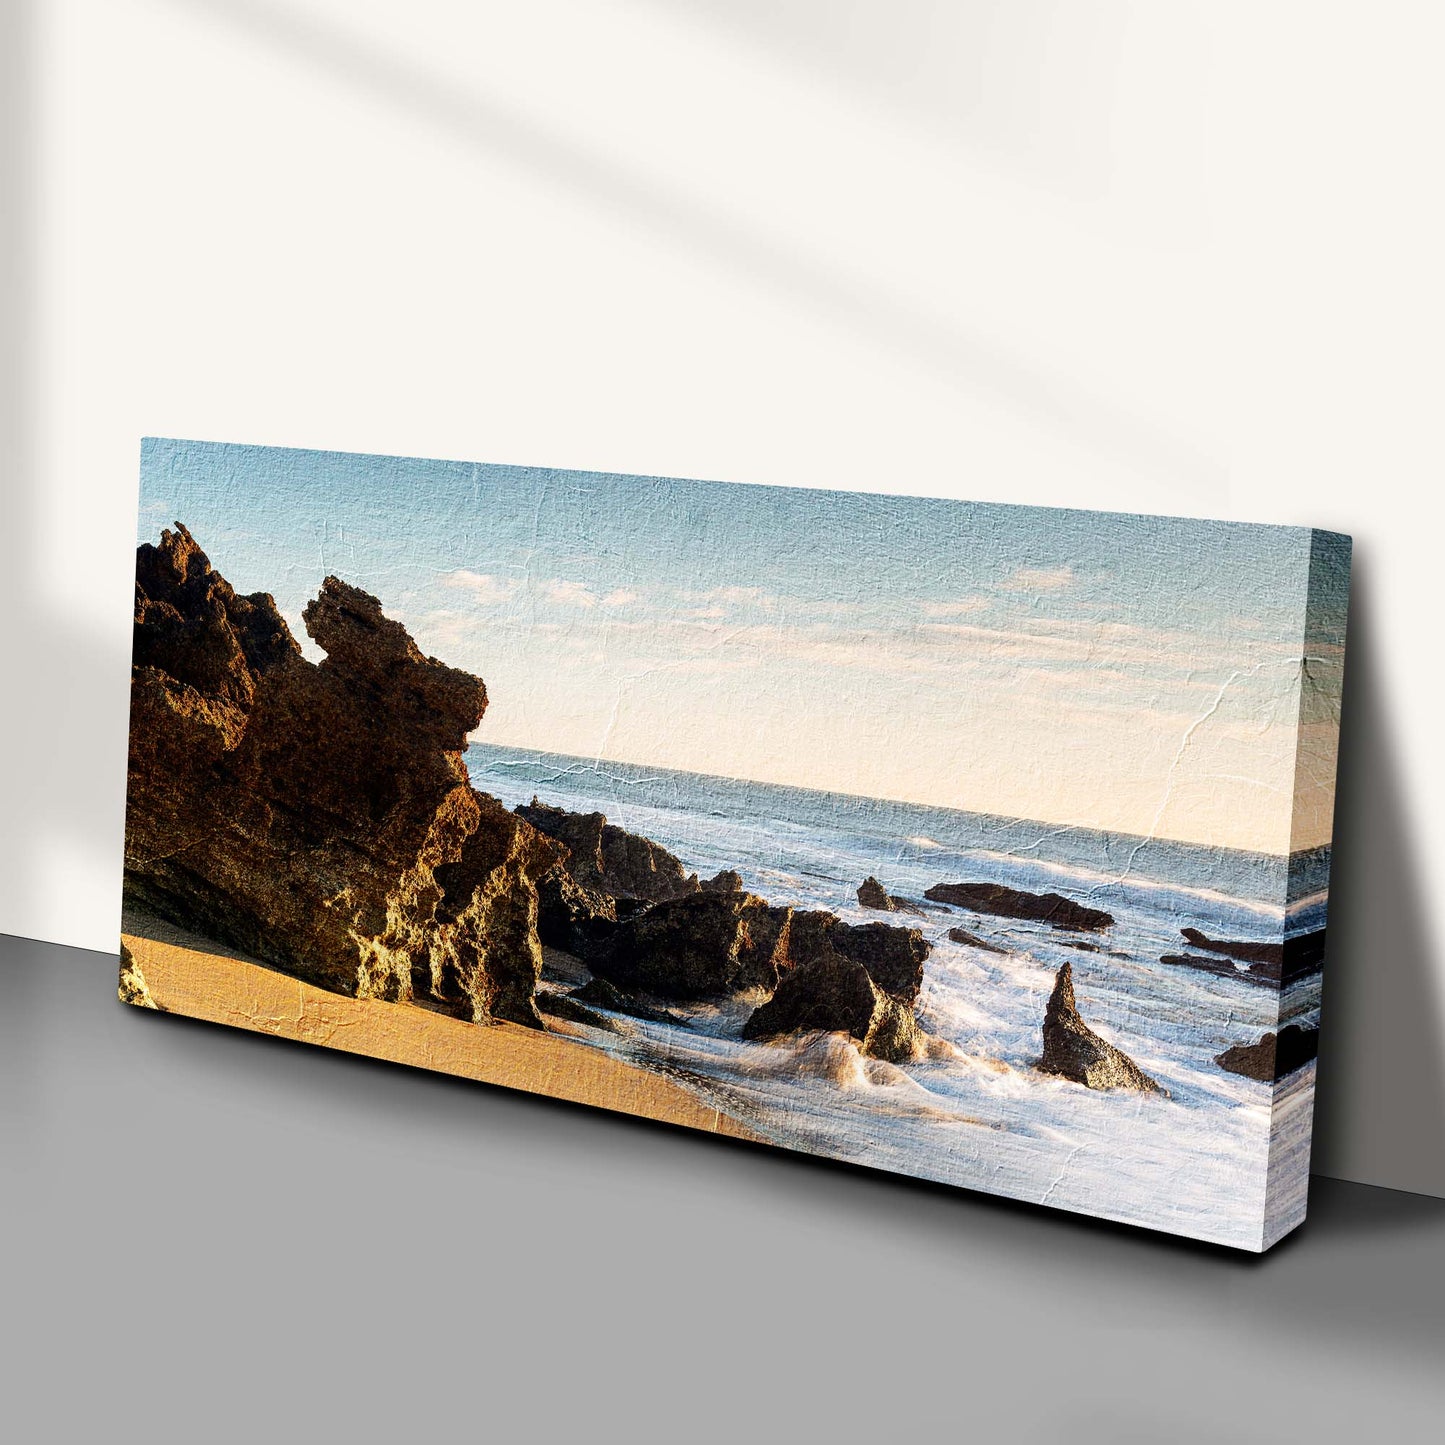 Sunset At California Beach Canvas Wall Art Style 2 - Image by Tailored Canvases